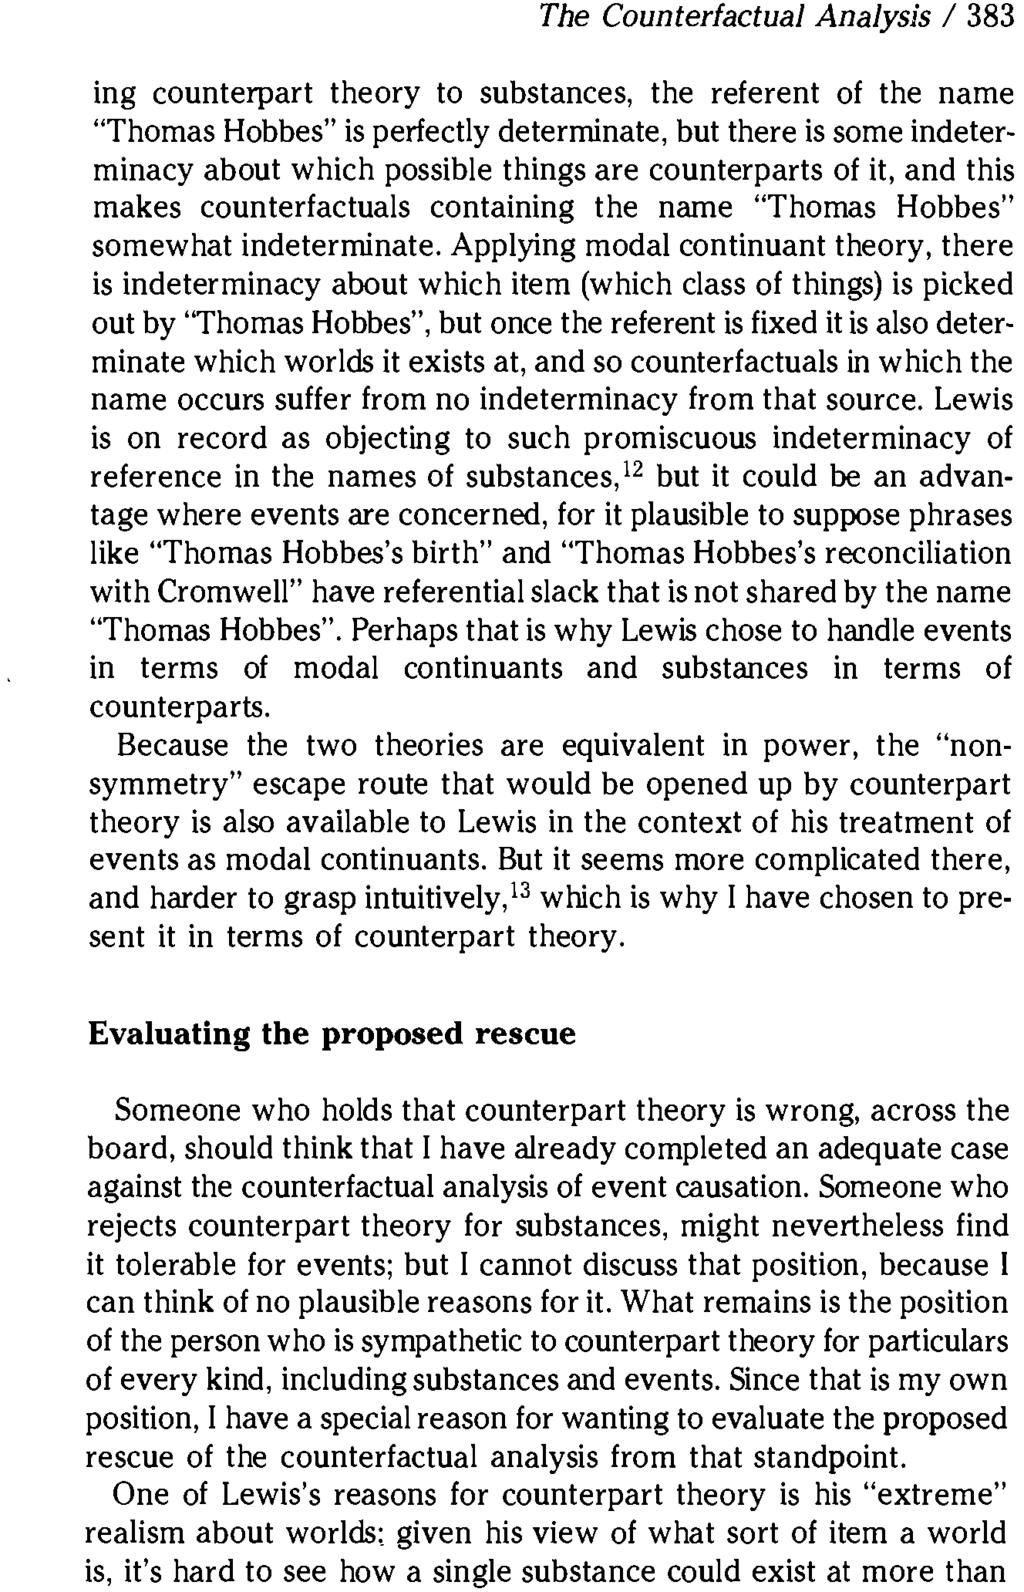 The Counterfactual Analysis / 383 ing counterpart theory to substances, the referent of the name "Thomas Hobbes" is perfectly determinate, but there is some indeterminacy about which possible things